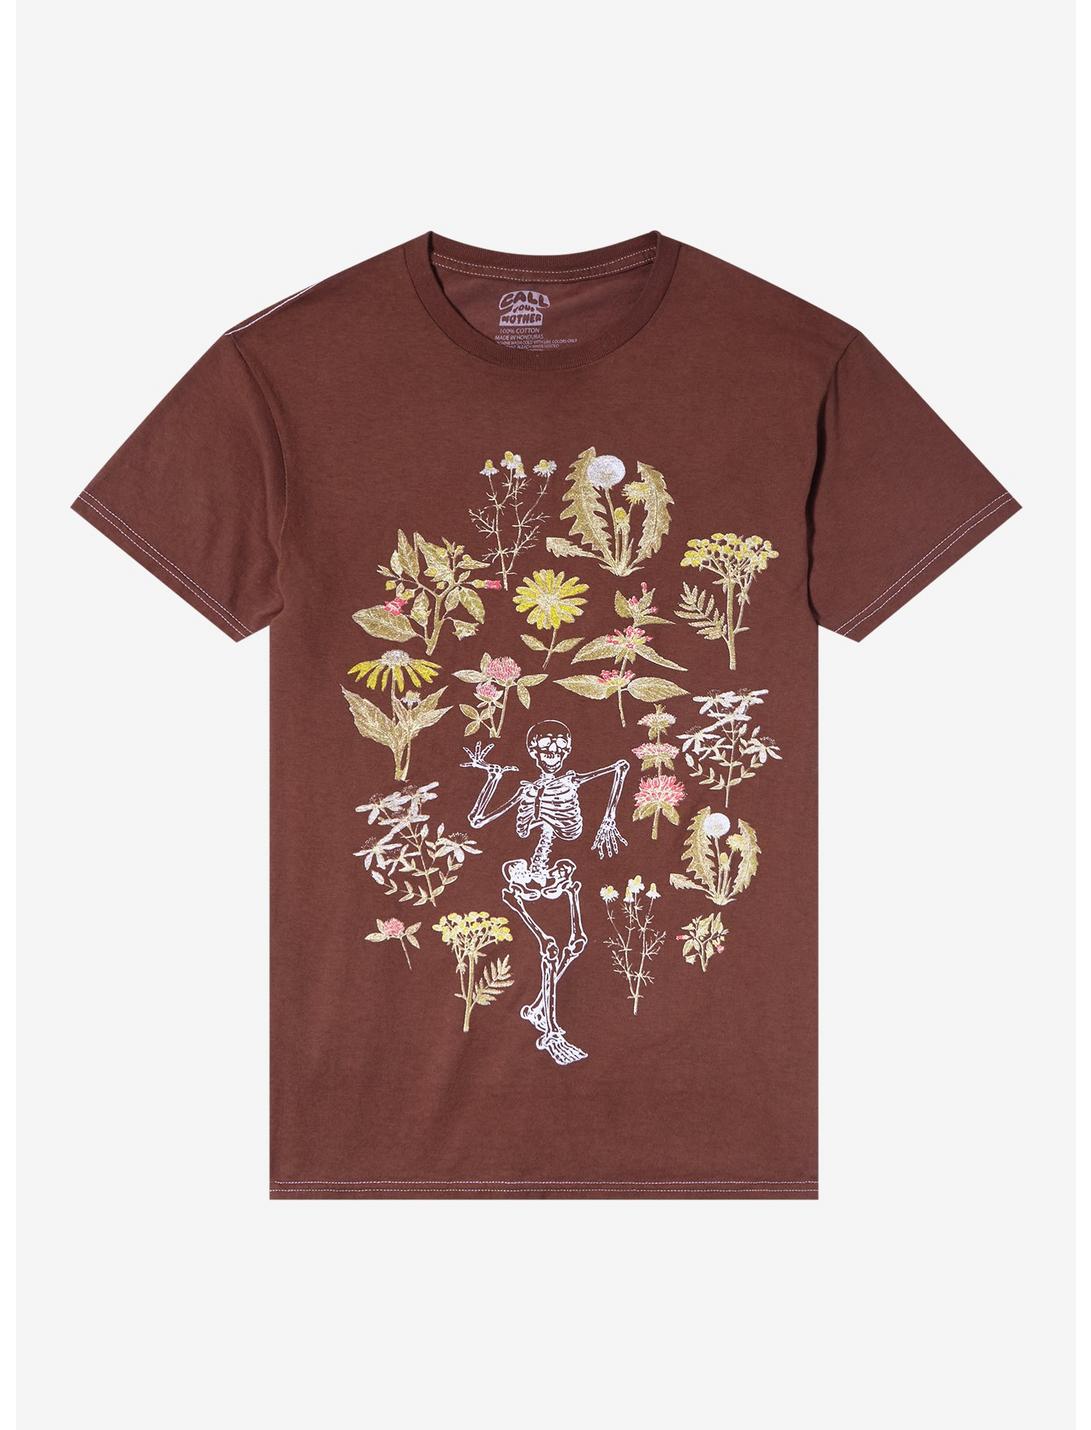 Brown Skeleton Floral Boyfriend Fit Girls T-Shirt By Call Your Mother, MULTI, hi-res